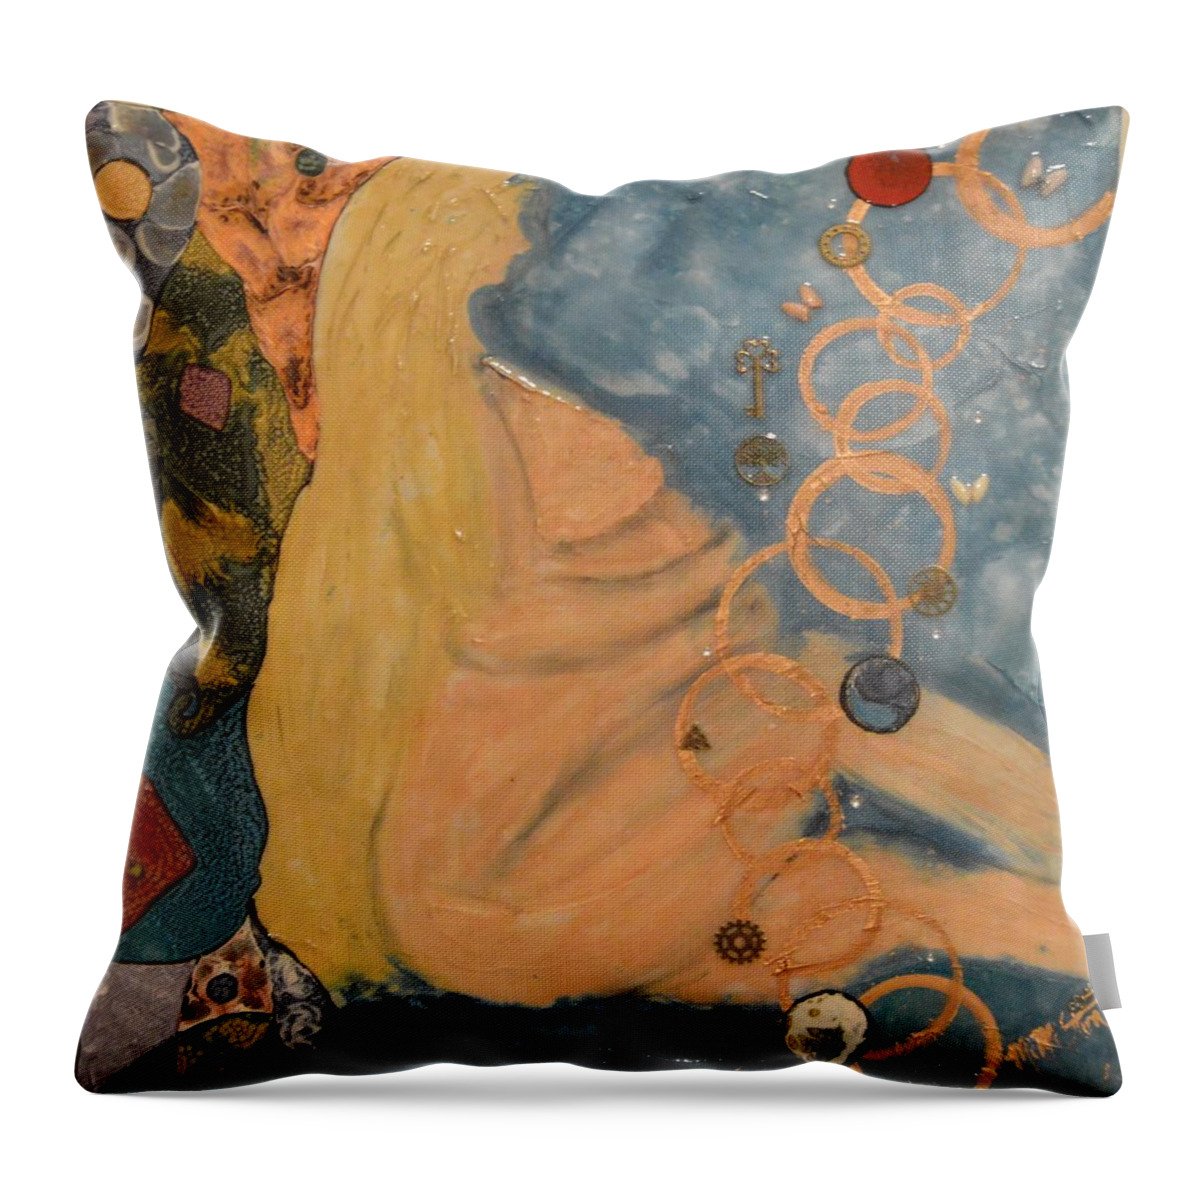  Throw Pillow featuring the painting Birth by MiMi Stirn